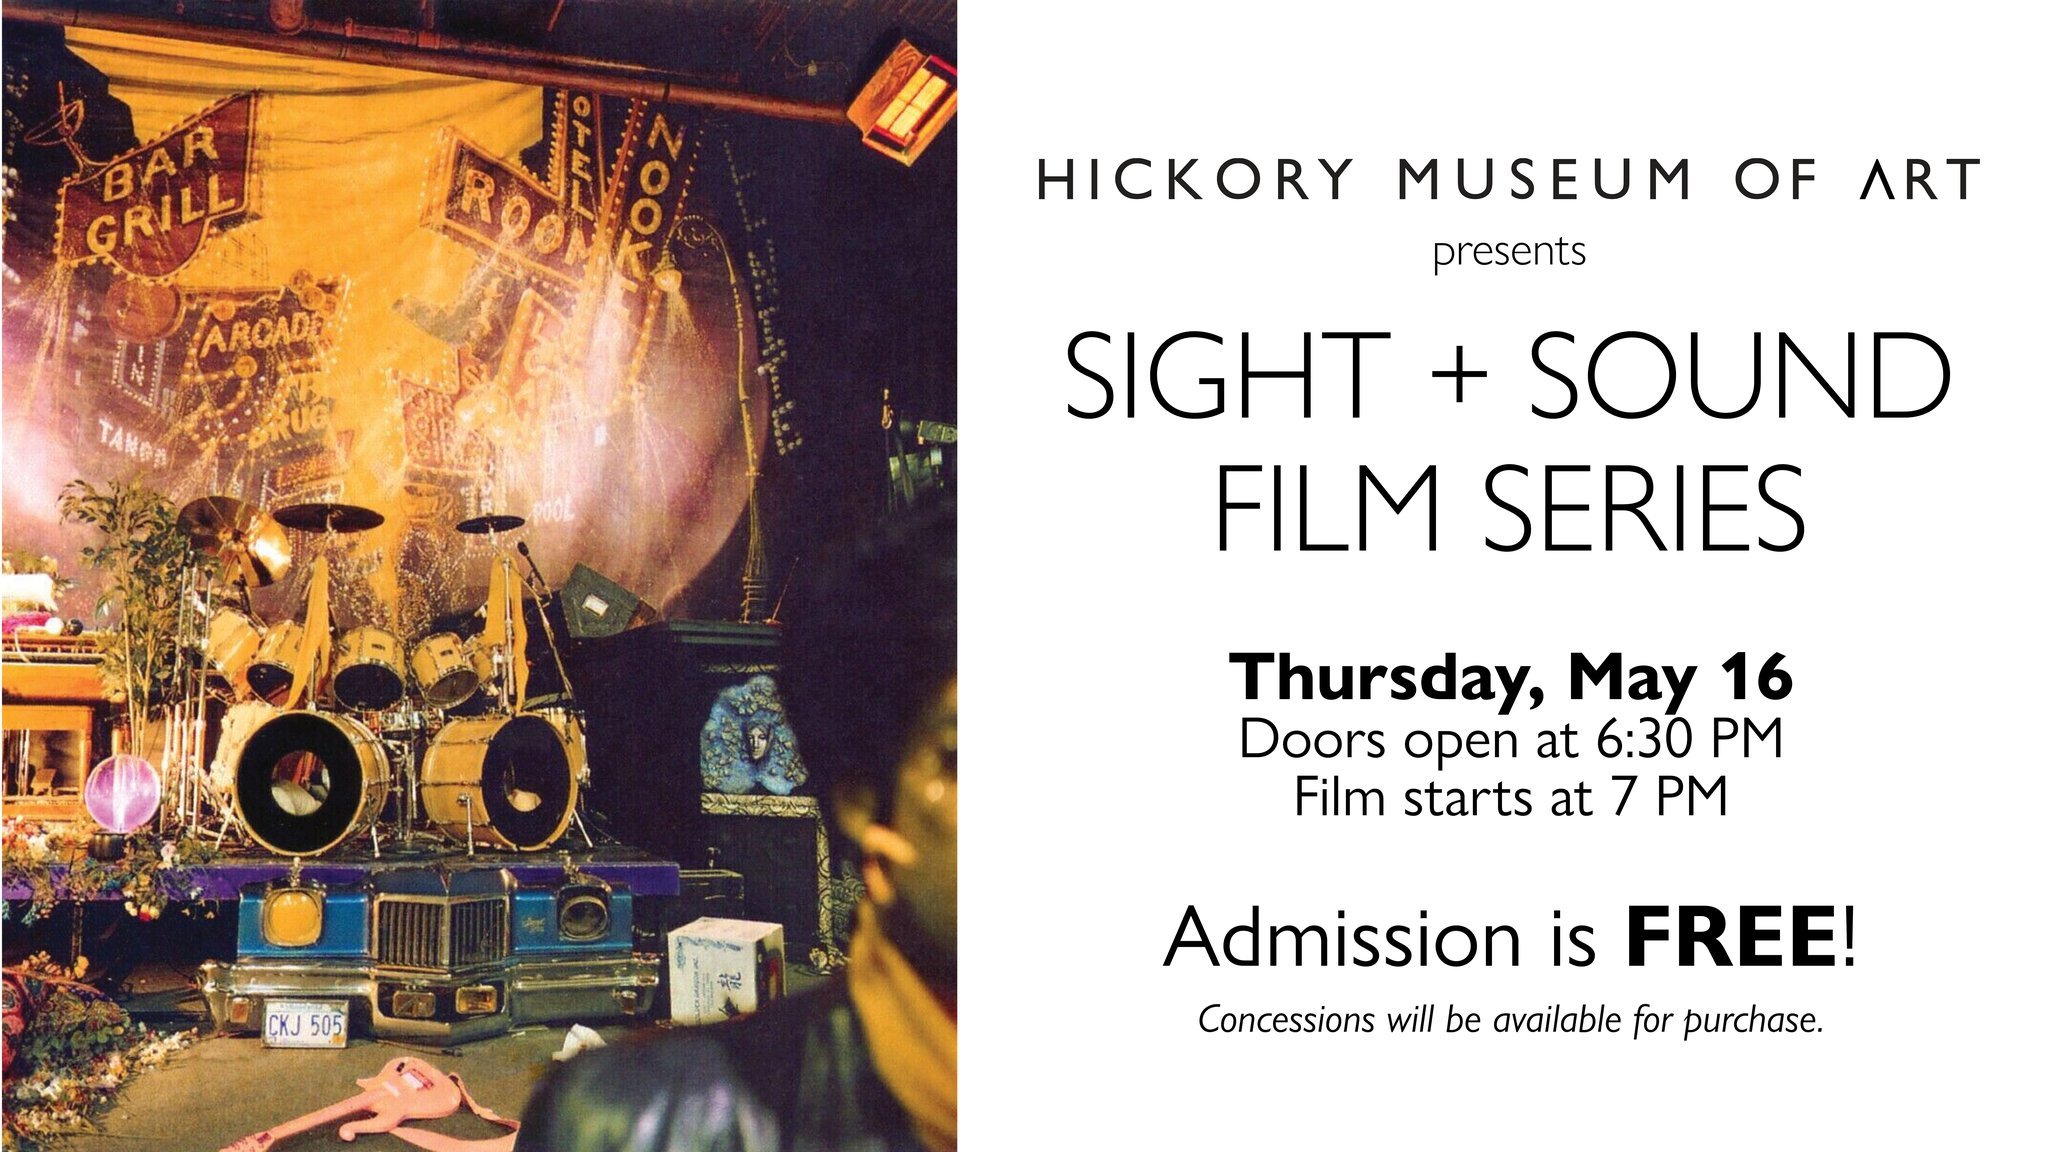 Join us tomorrow for an evening immersed in the sights and sounds of a multi-generational musical legend. Admission is FREE!

#hma #hickoryart #hickoryartmuseumfree #hickoryartmuseum